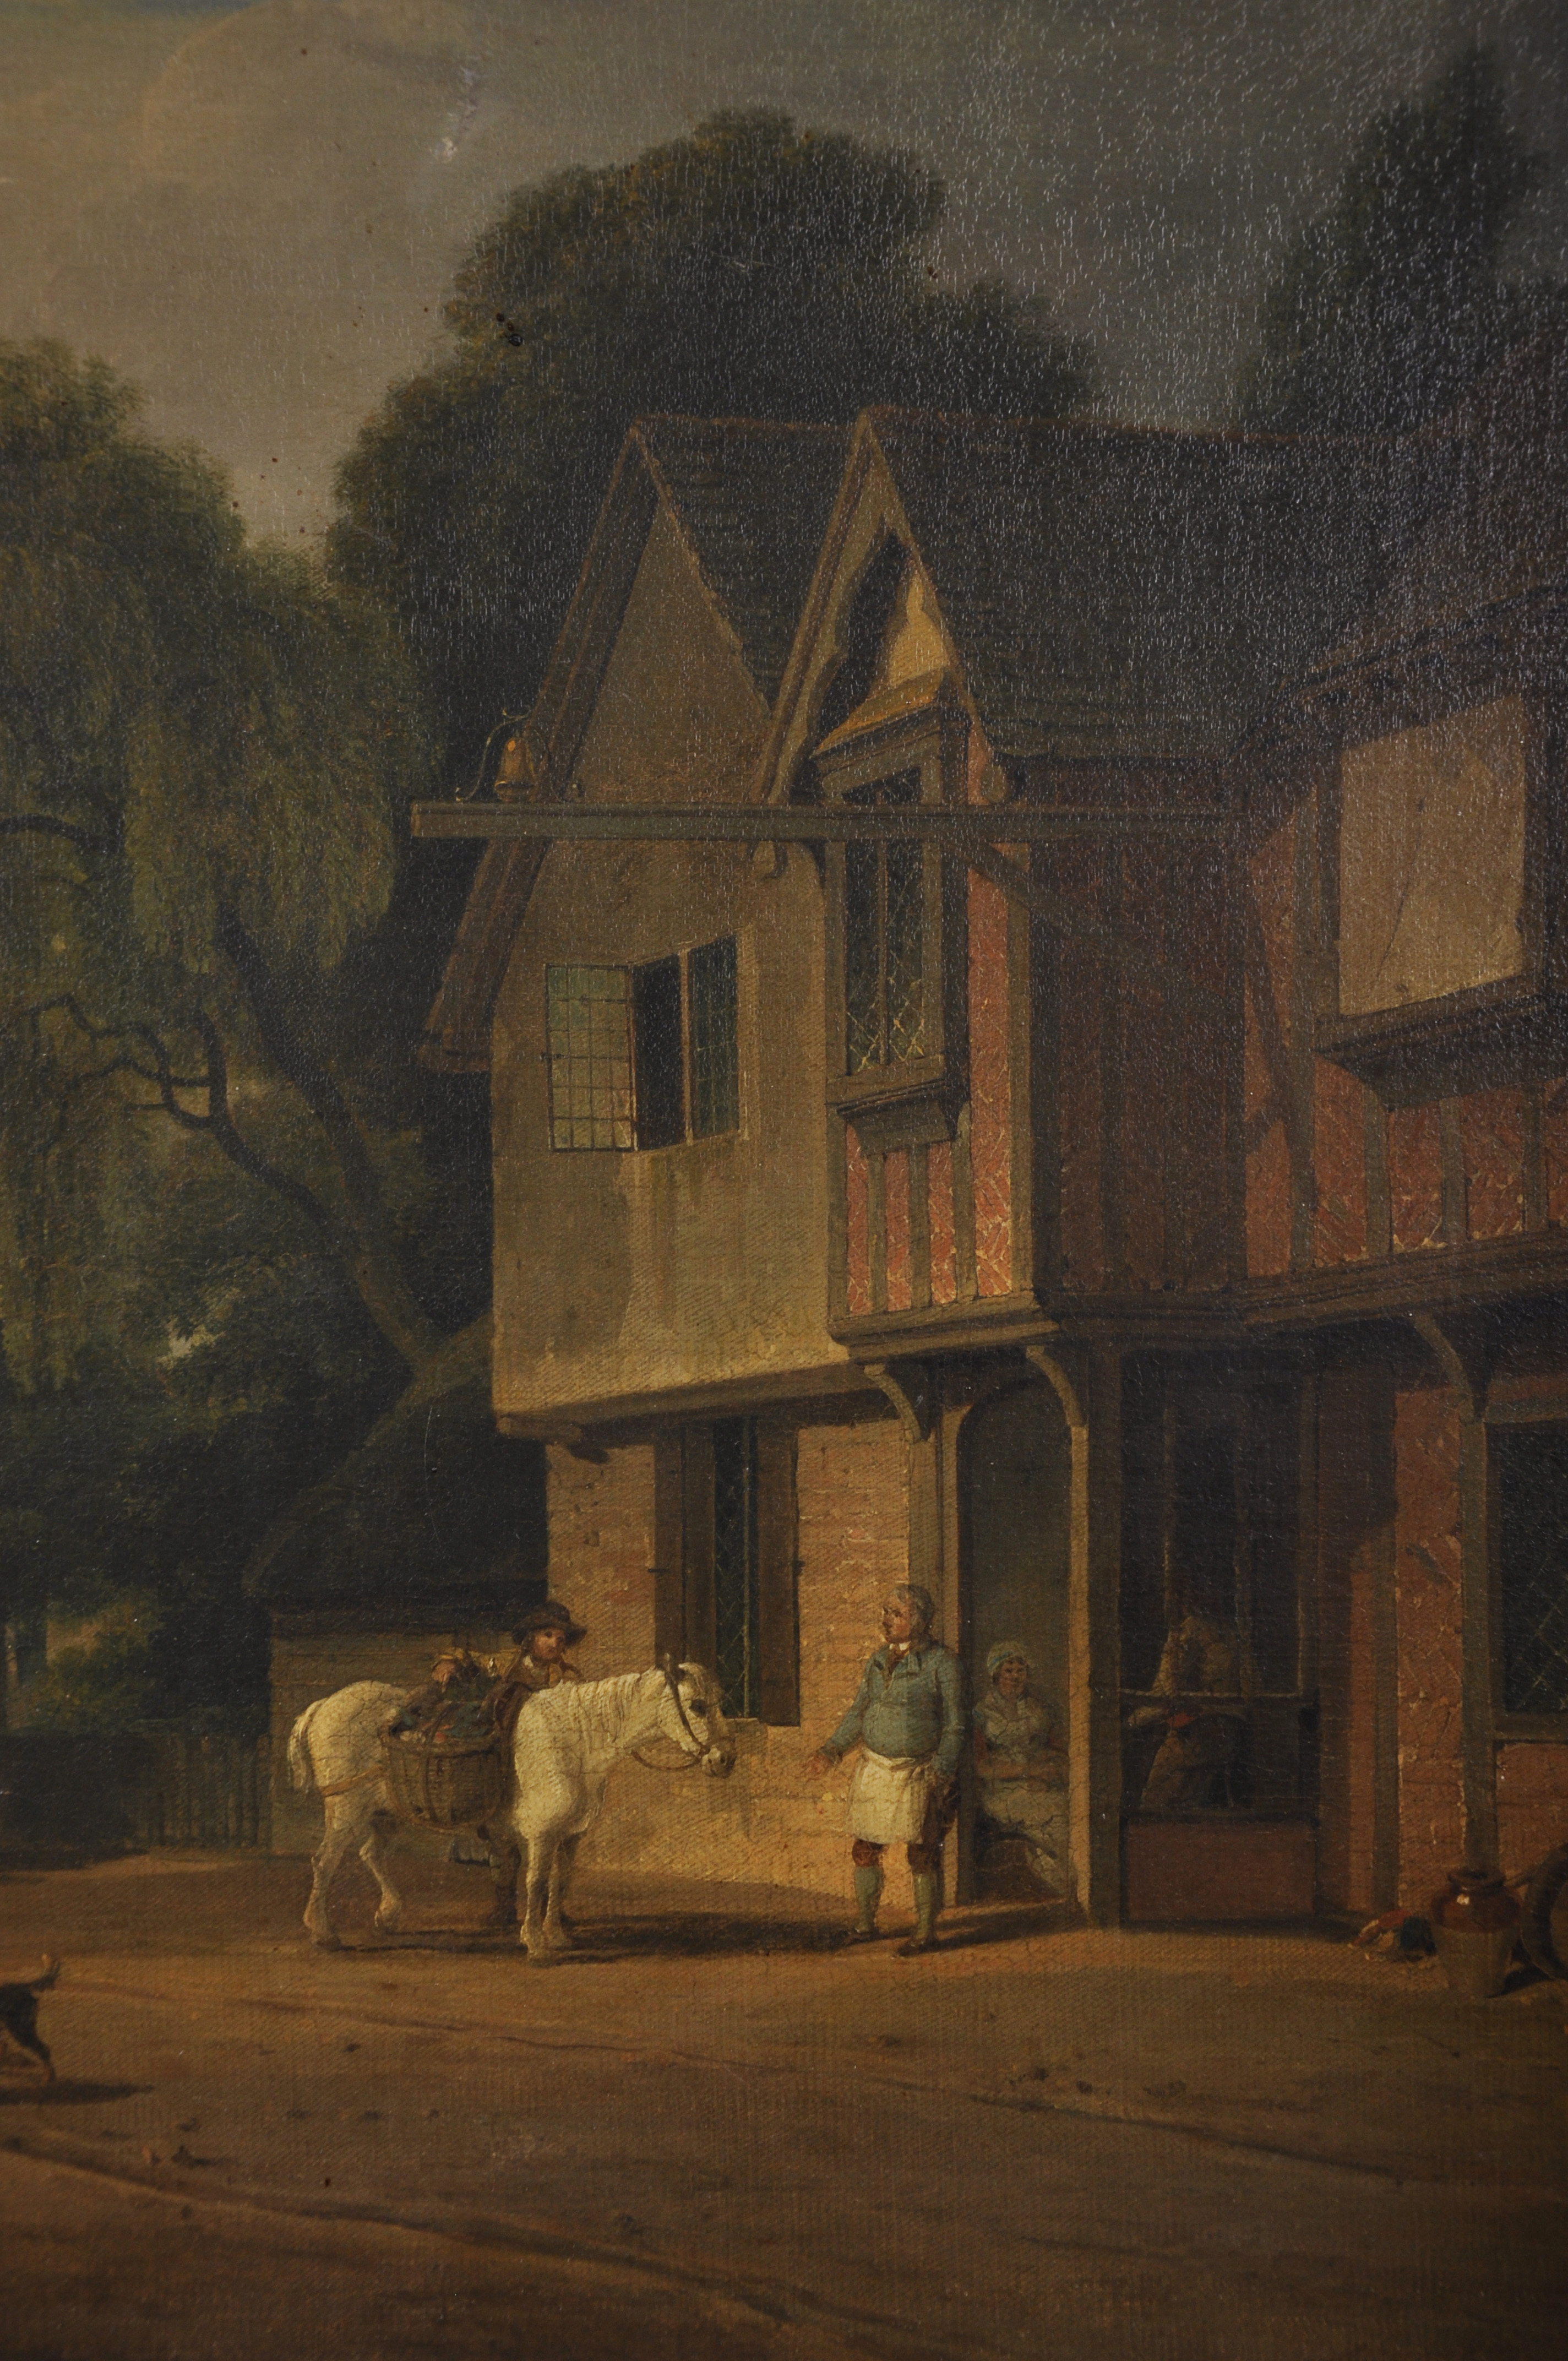 Andrew Wilson (1780-1848) British. “A View of The Bell Inn Hurley, Herts”, with Figures and Dogs - Image 4 of 9